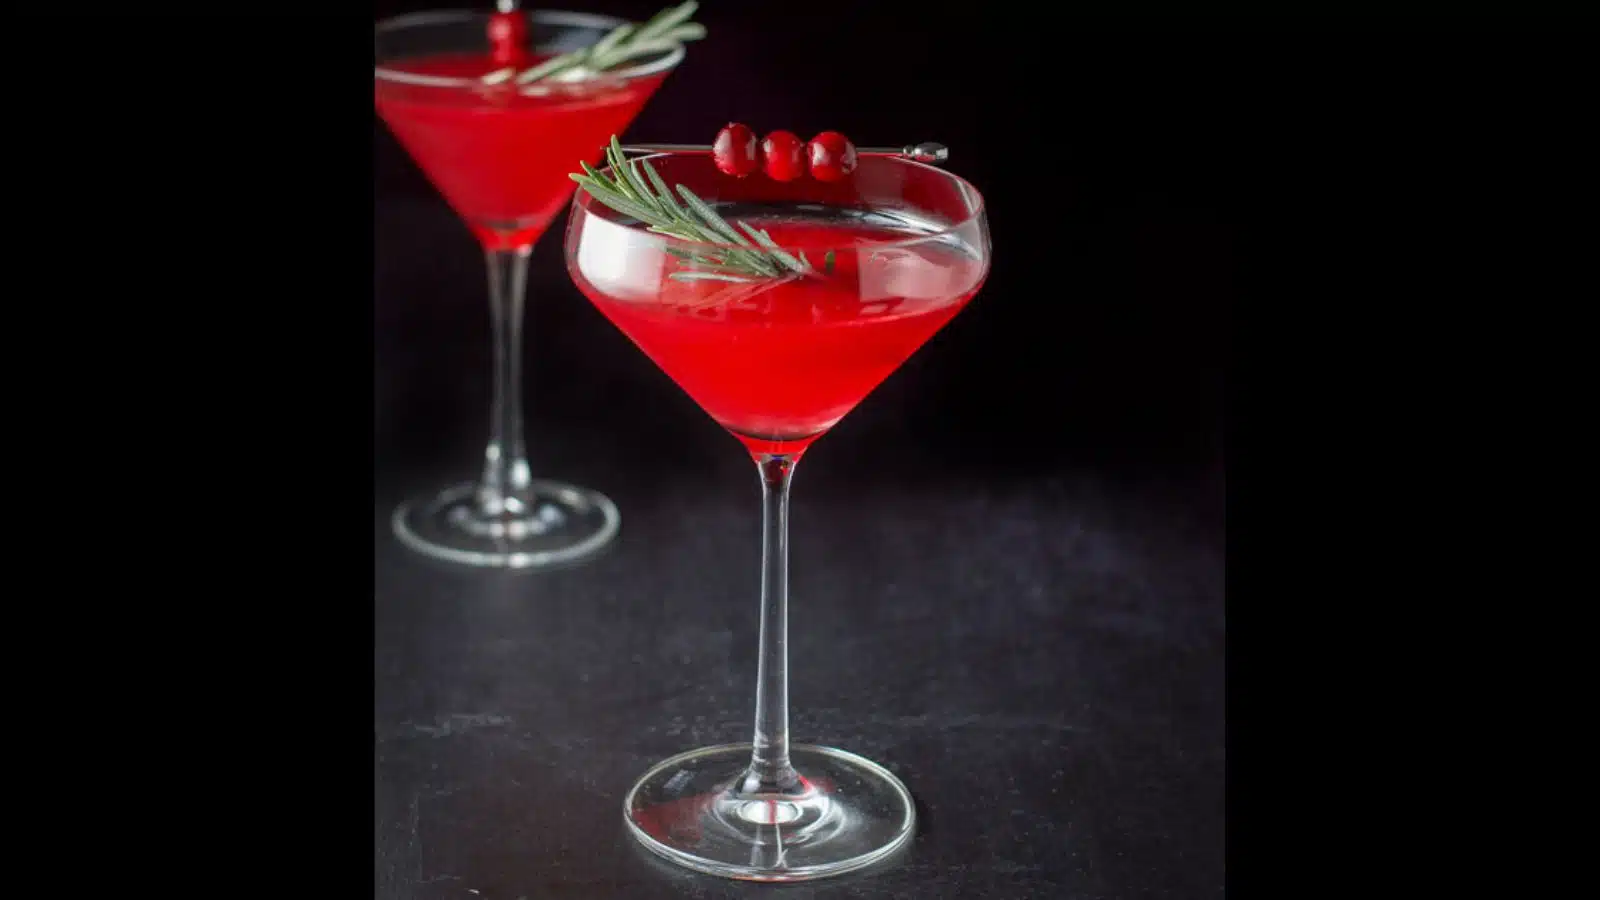 Two martini glasses filled with the red holiday cocktail with rosemary and cranberries as garnish